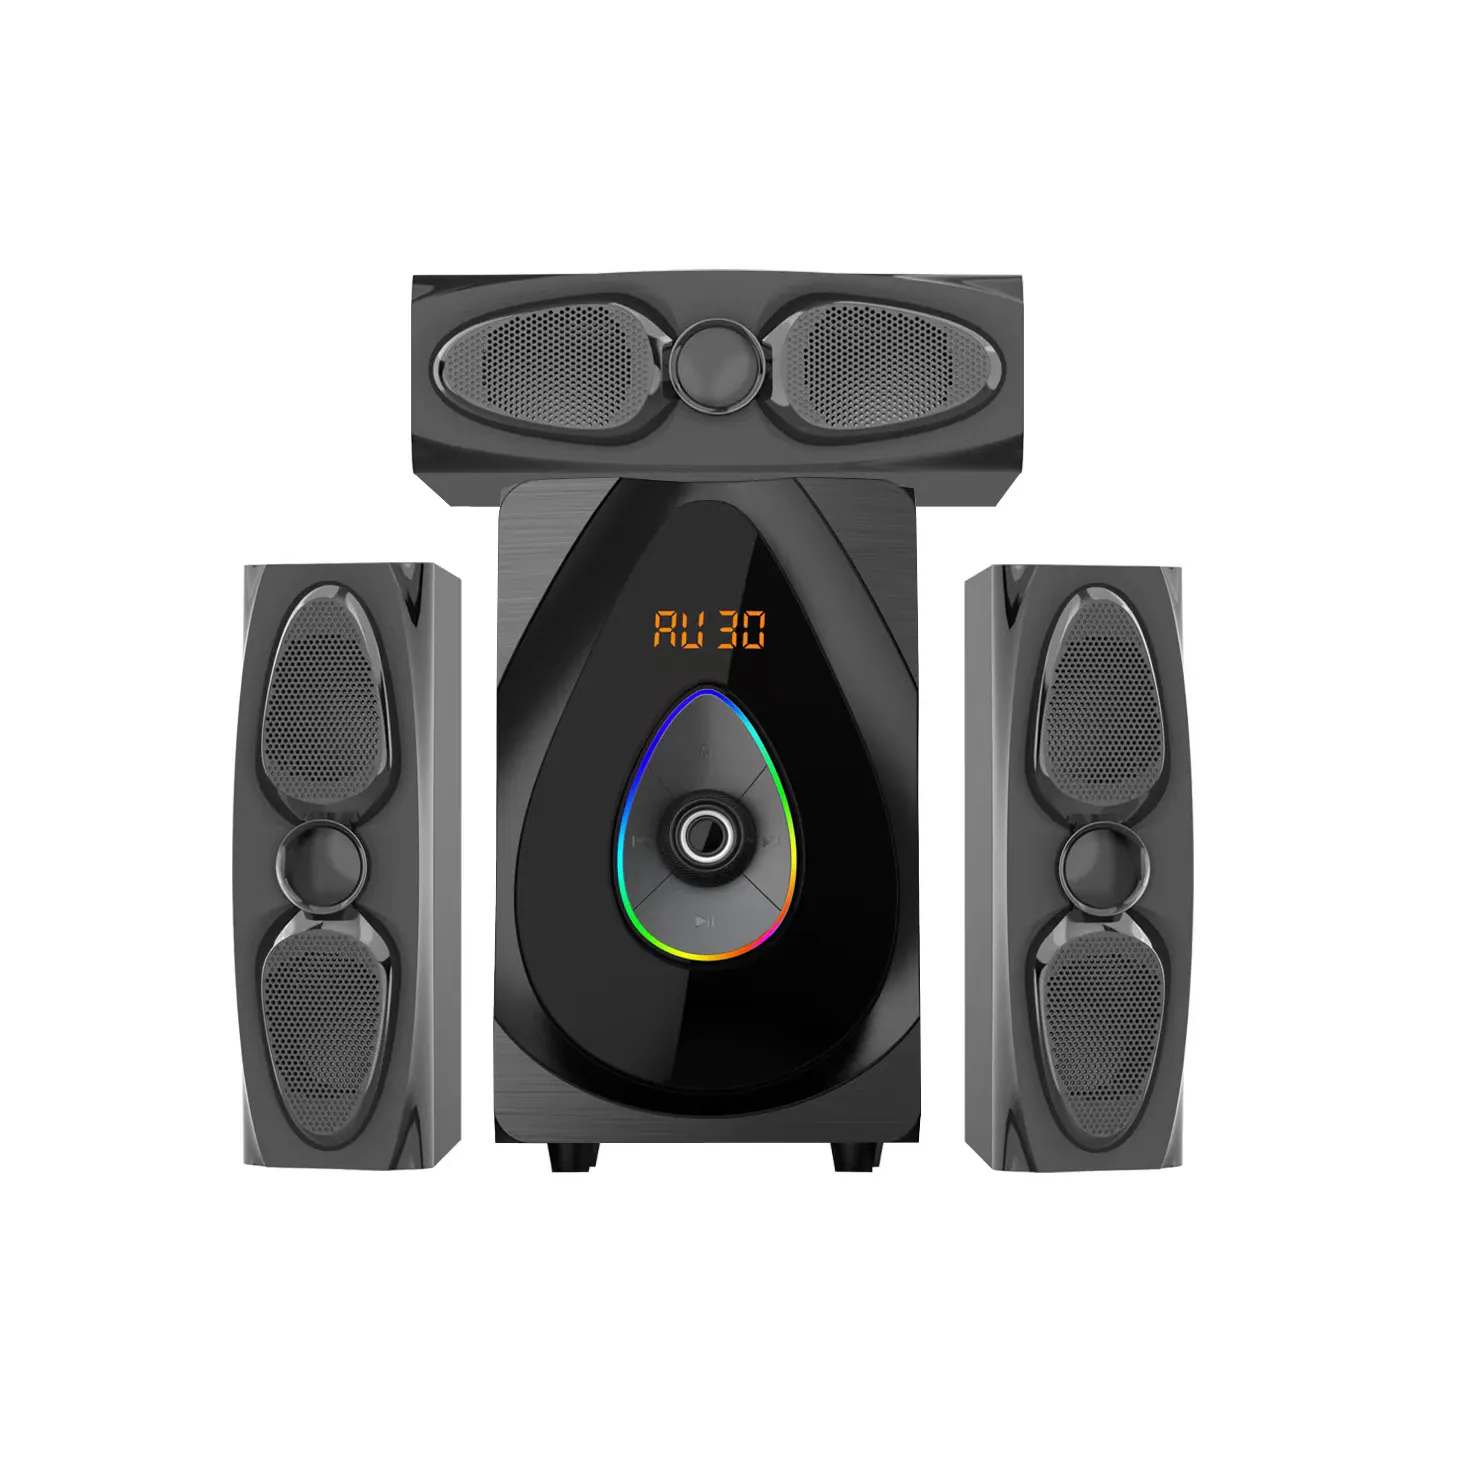 6.5 inch Subwoofer Speaker Home Theater Speaker Audio System Parlantes Blue tooth DJ Speakers with Big bass